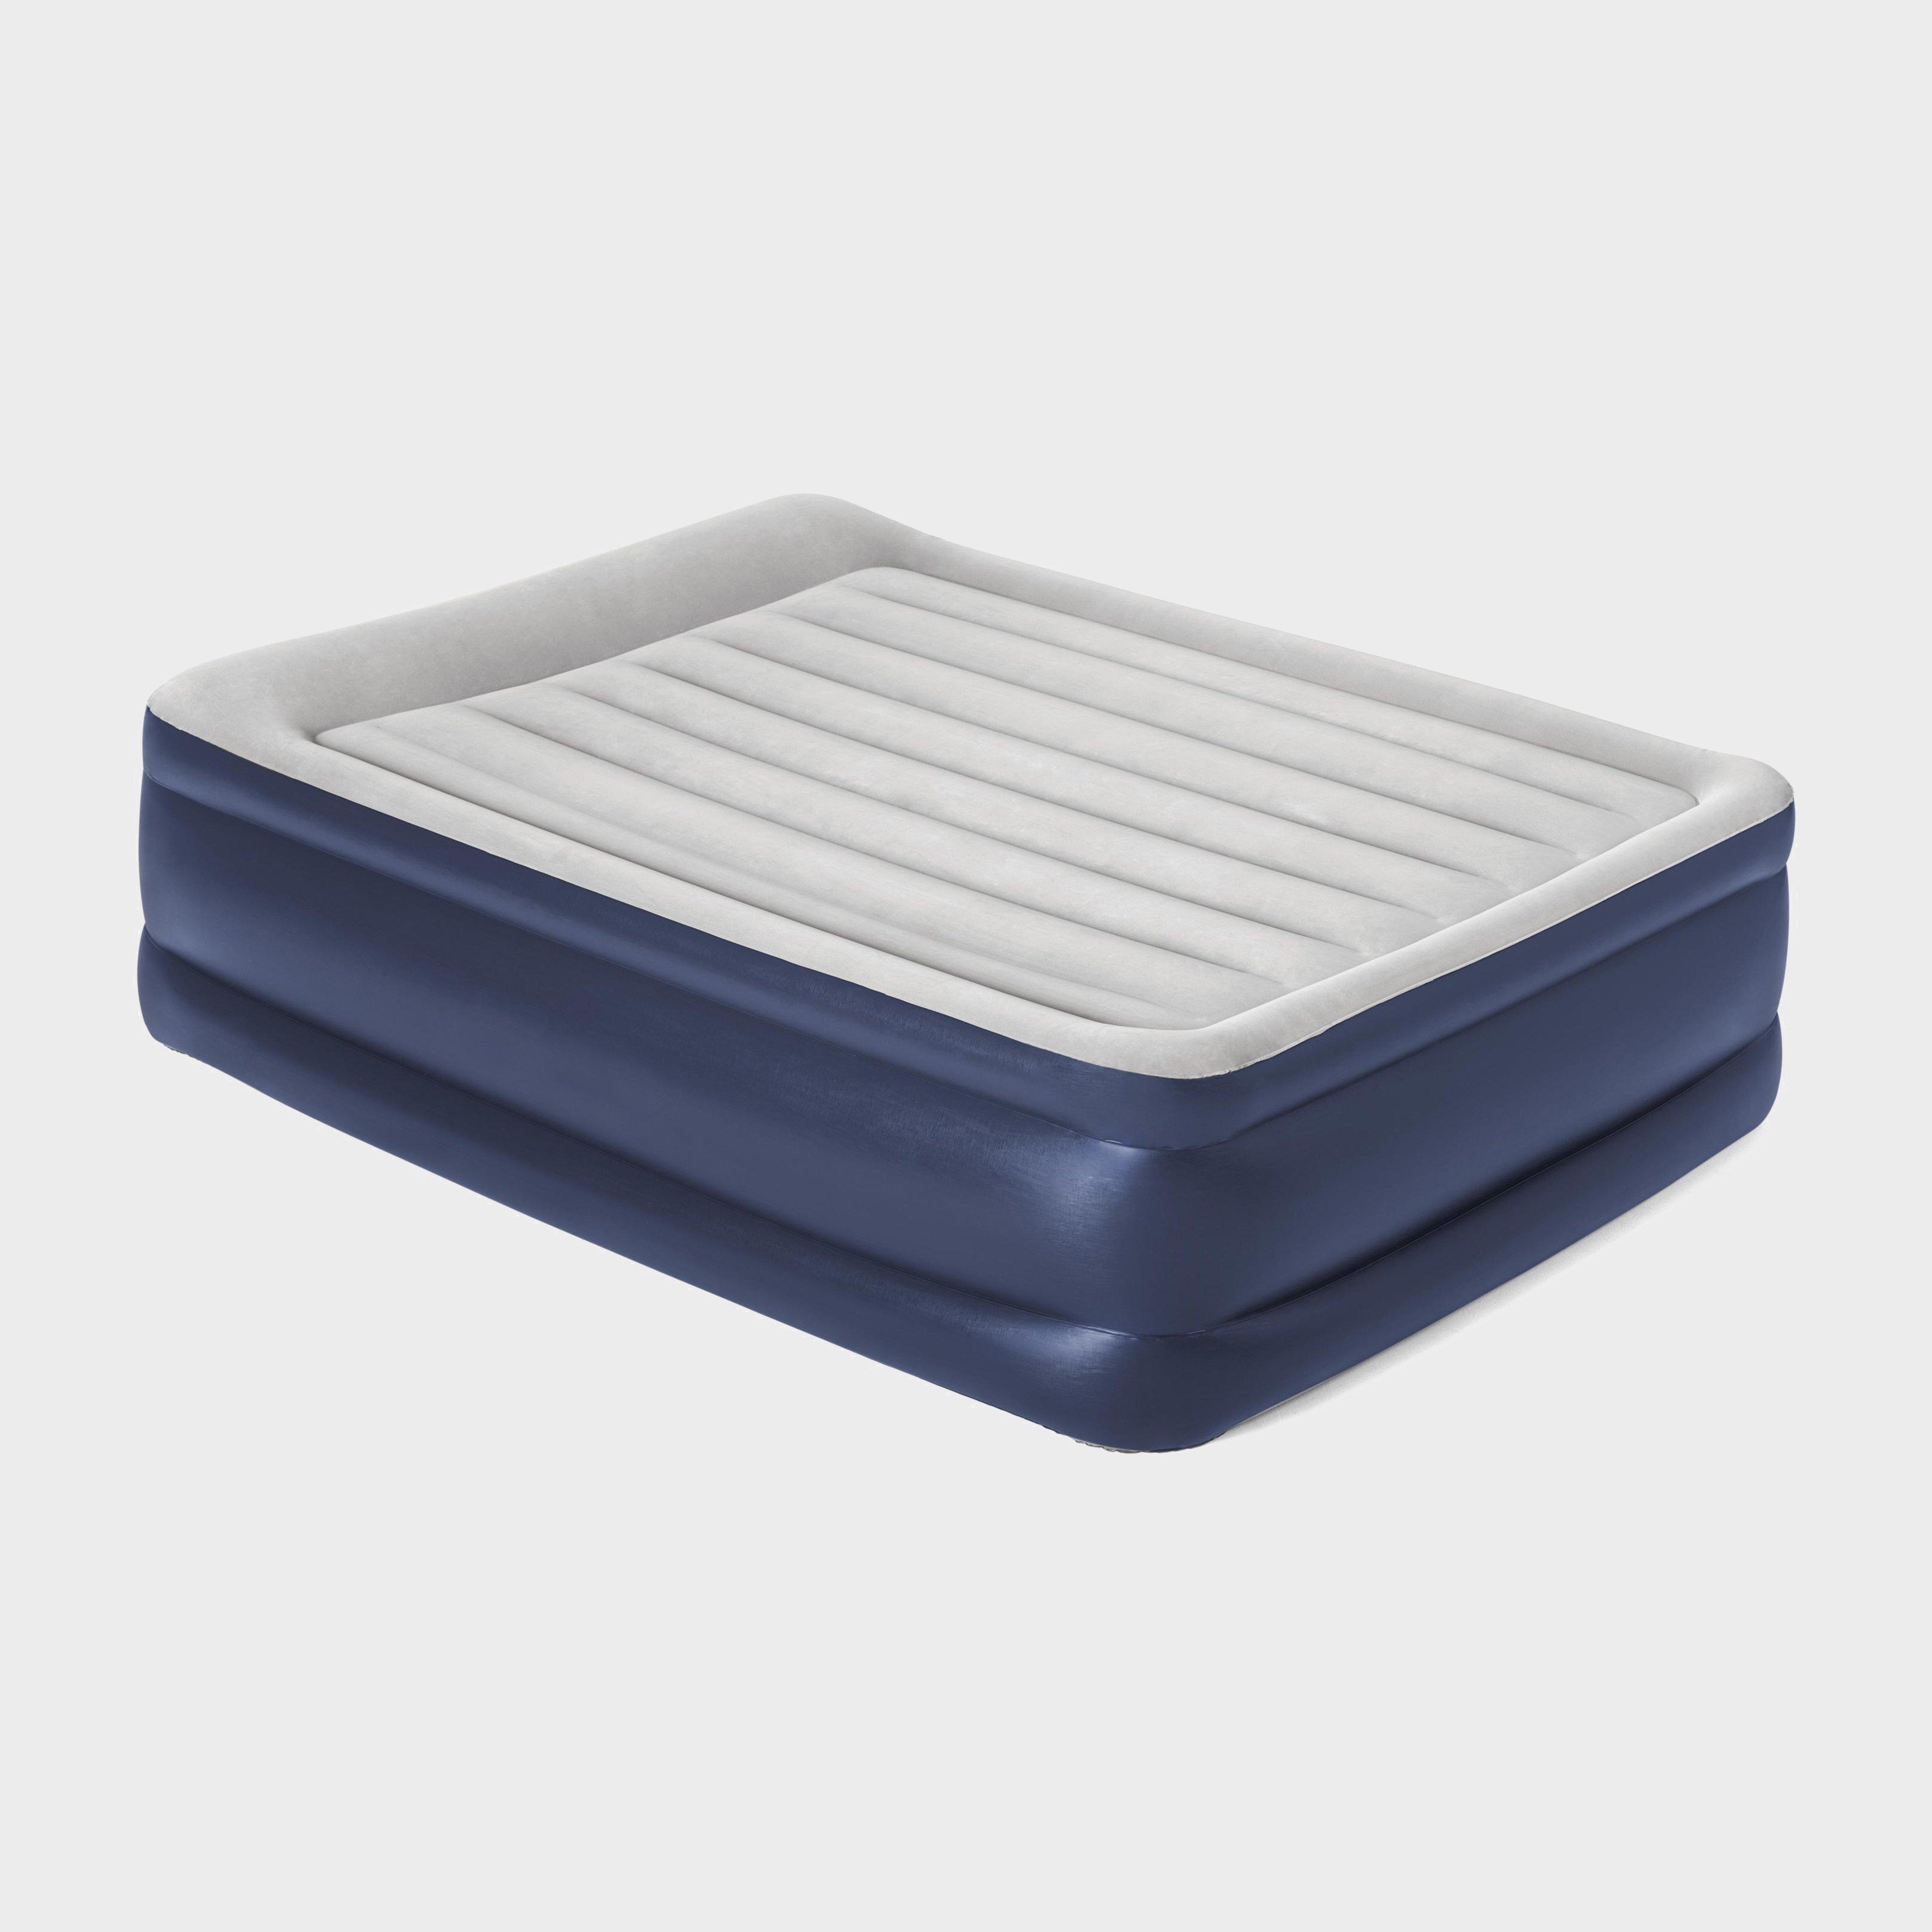 Hi-gear High Rise Flock King Size Airbed - Navy/nvy  Navy/nvy